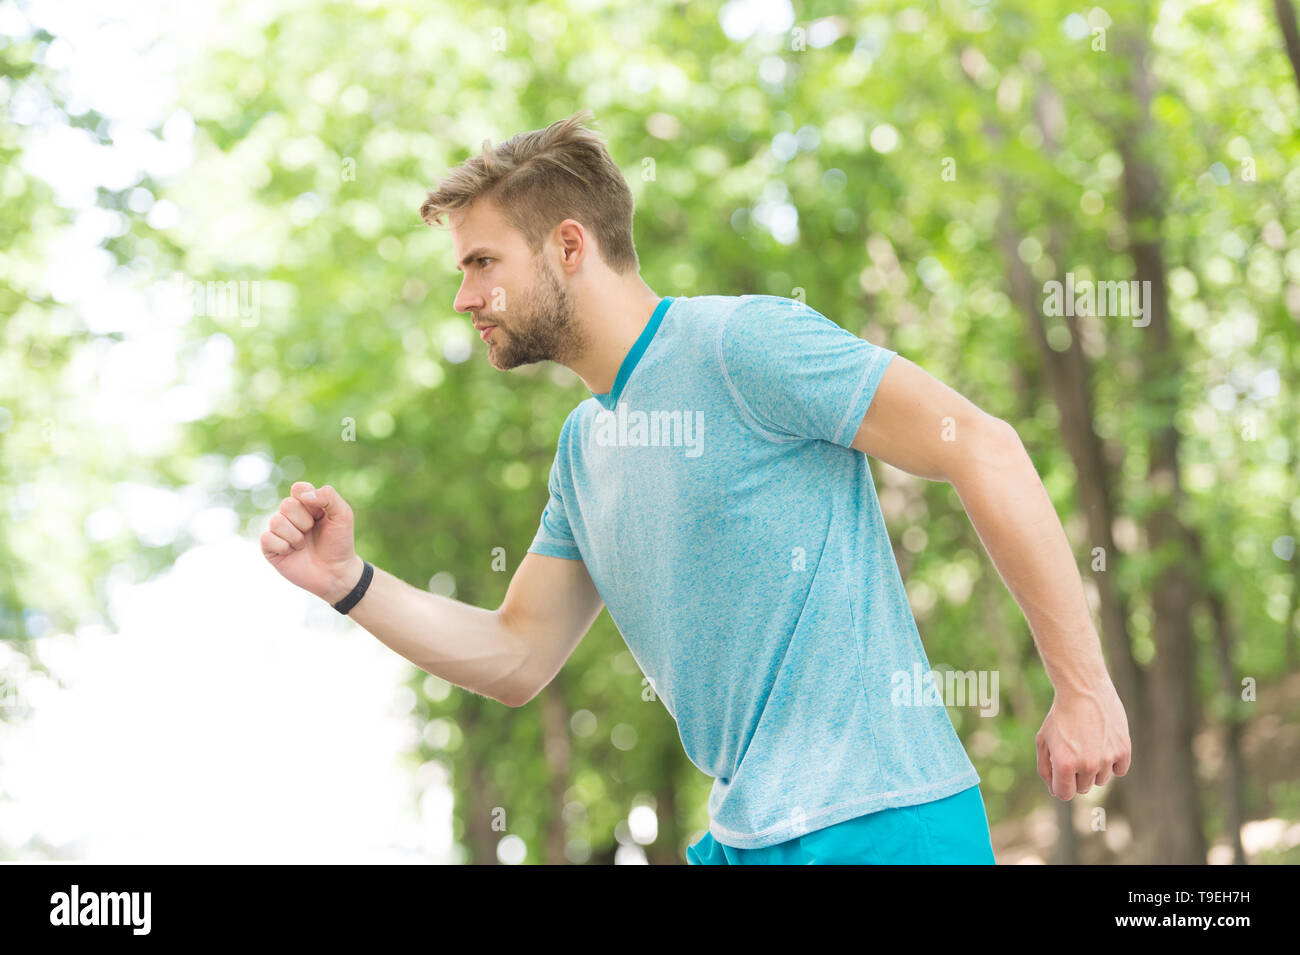 Moving to his goal. Man confident young running in park, side view. Sportsman ambitiously moves to achieve sport goal. Masculinity and sport achieveme Stock Photo